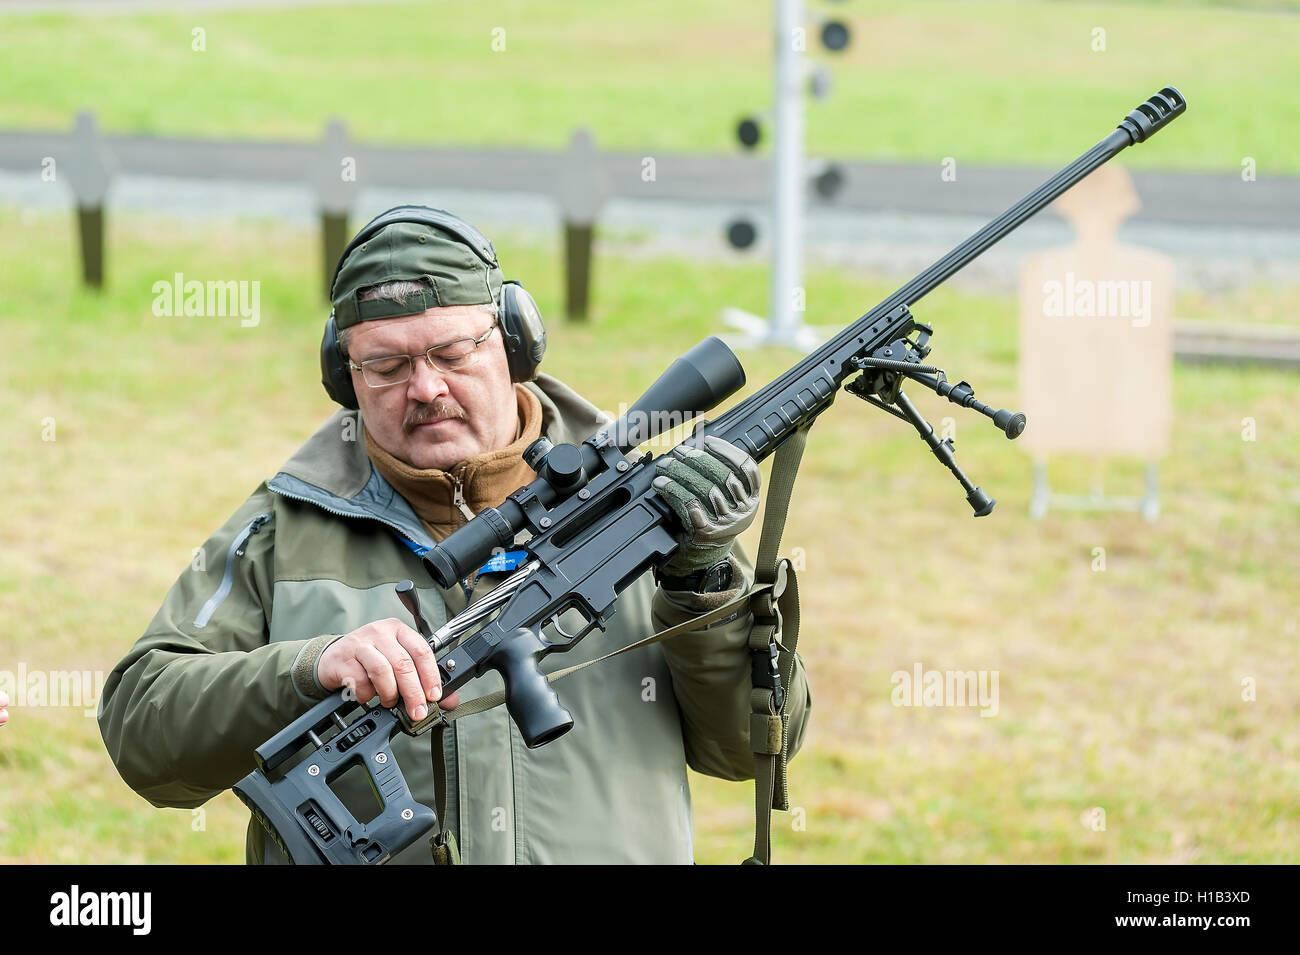 Representative of firm shows rifle ORSIS T-5000 Stock Photo